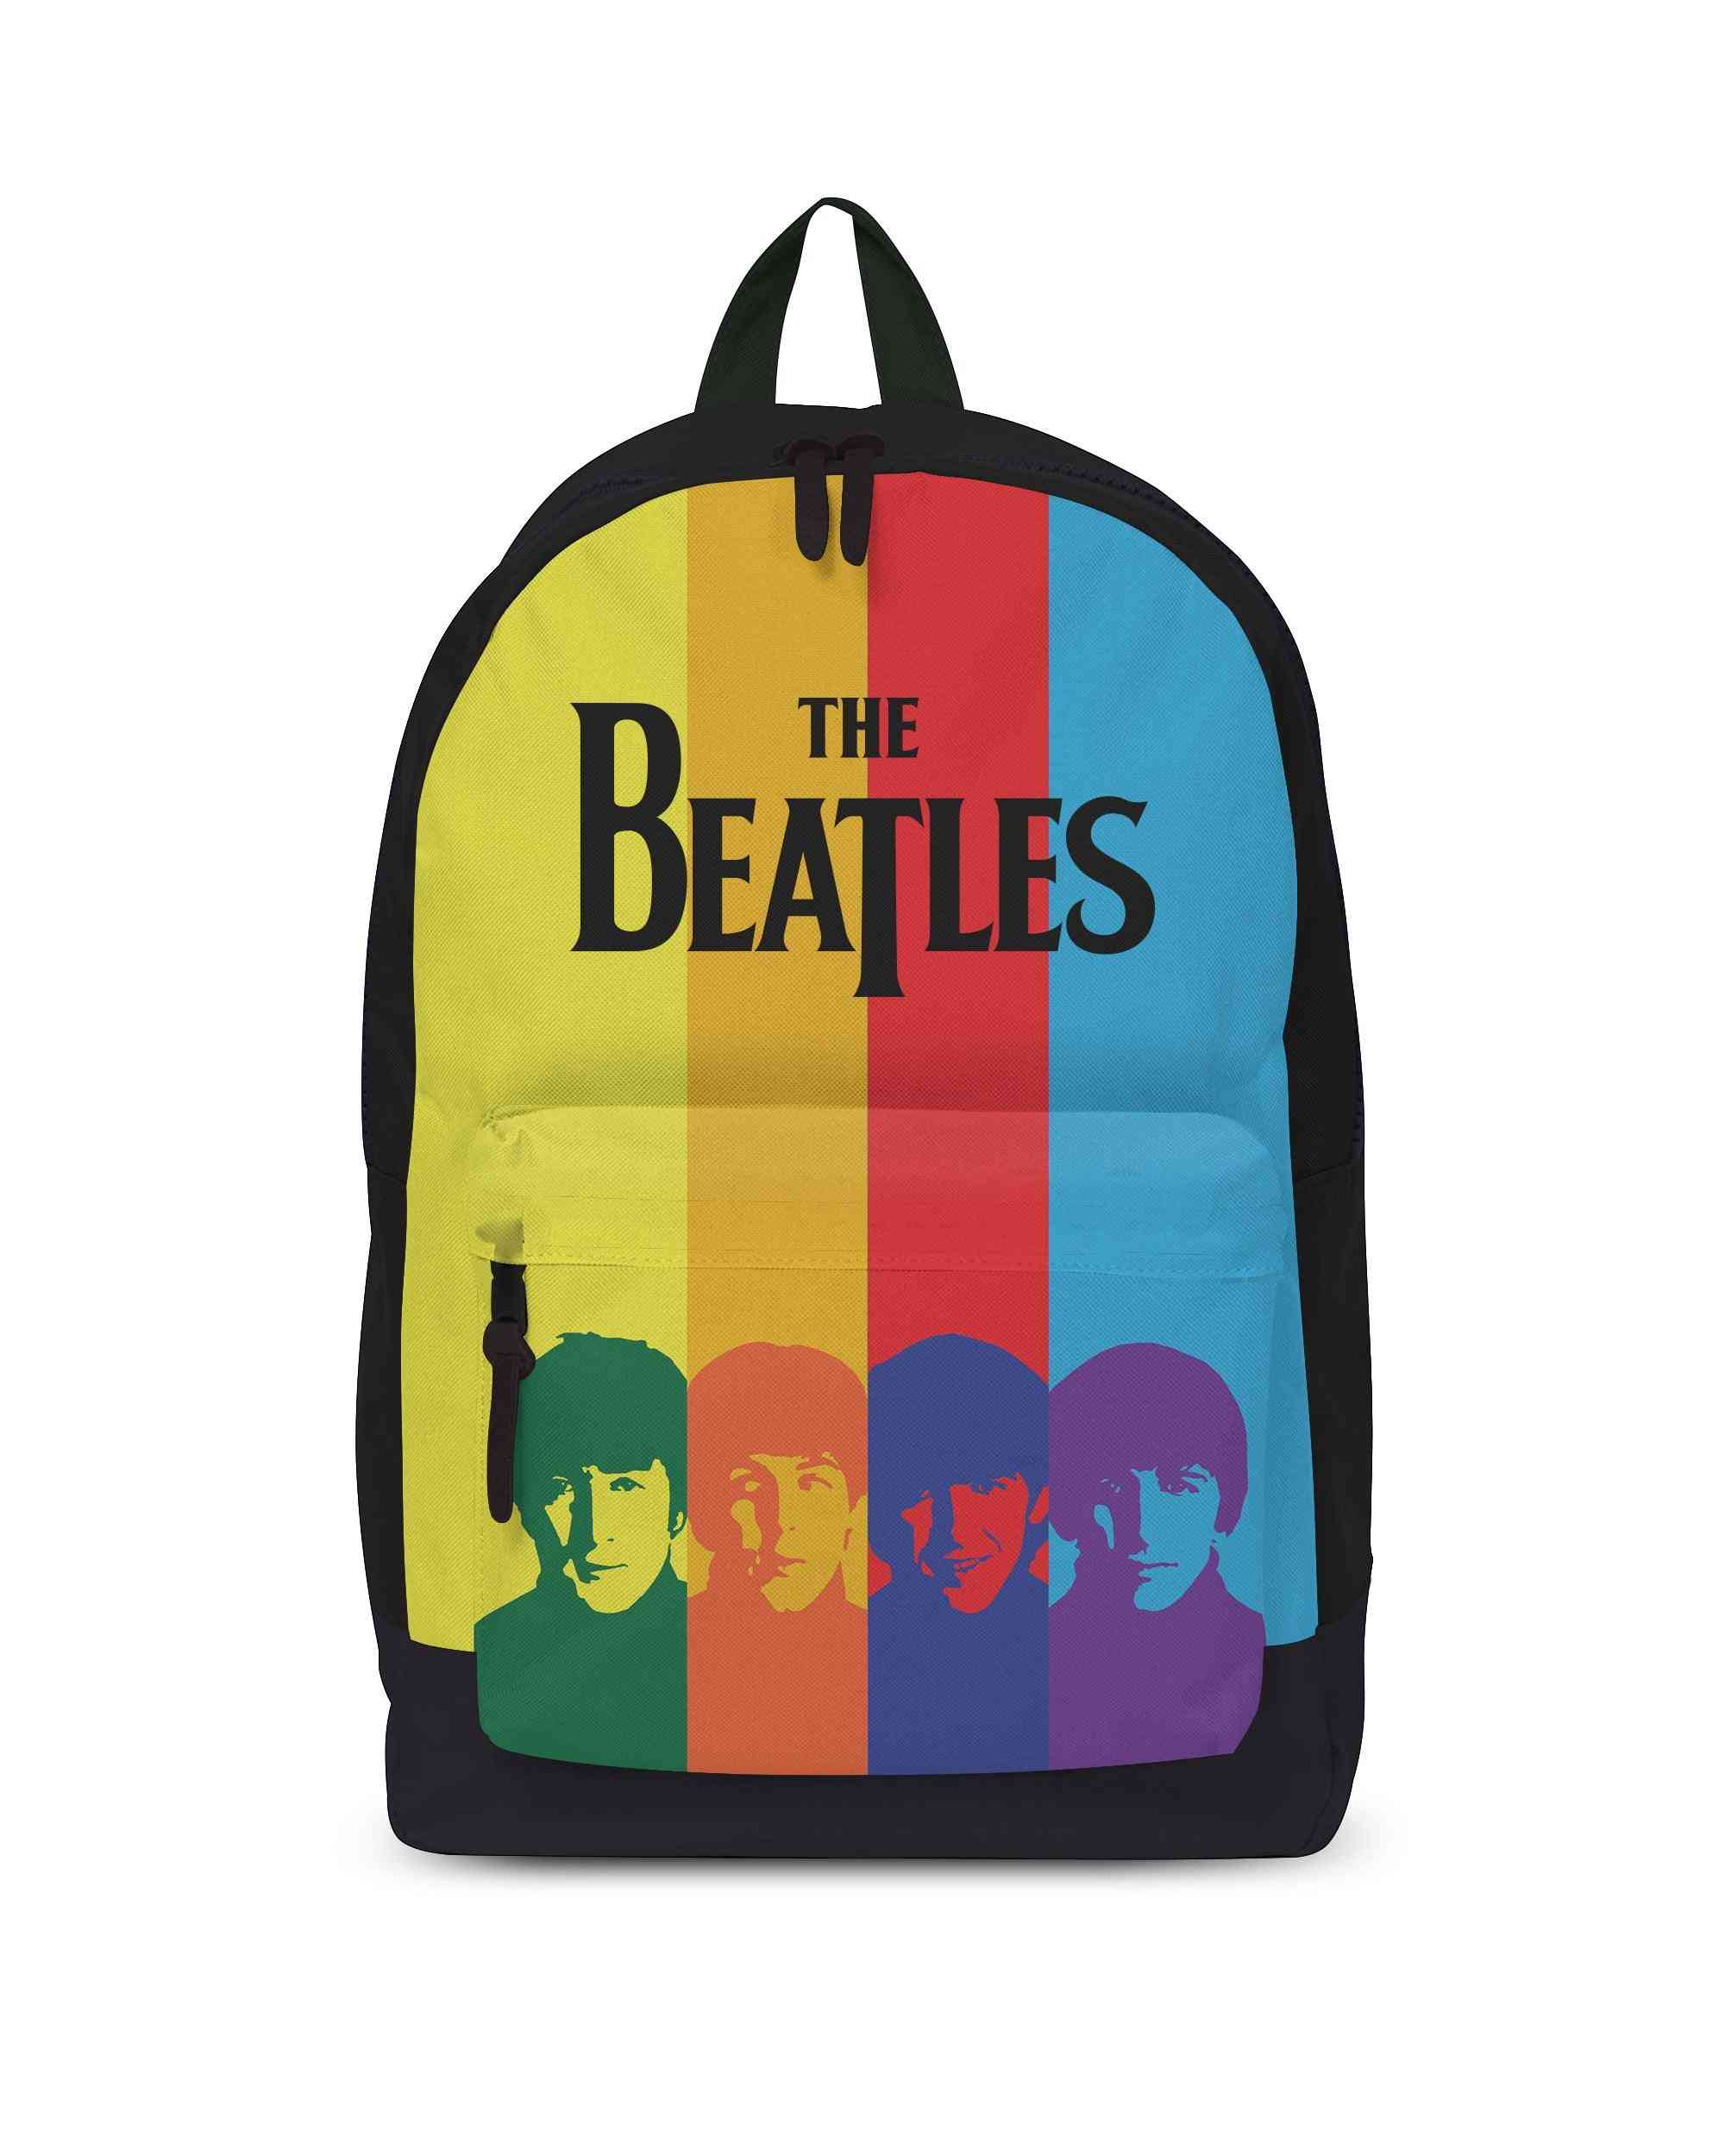 The Beatles Backpack